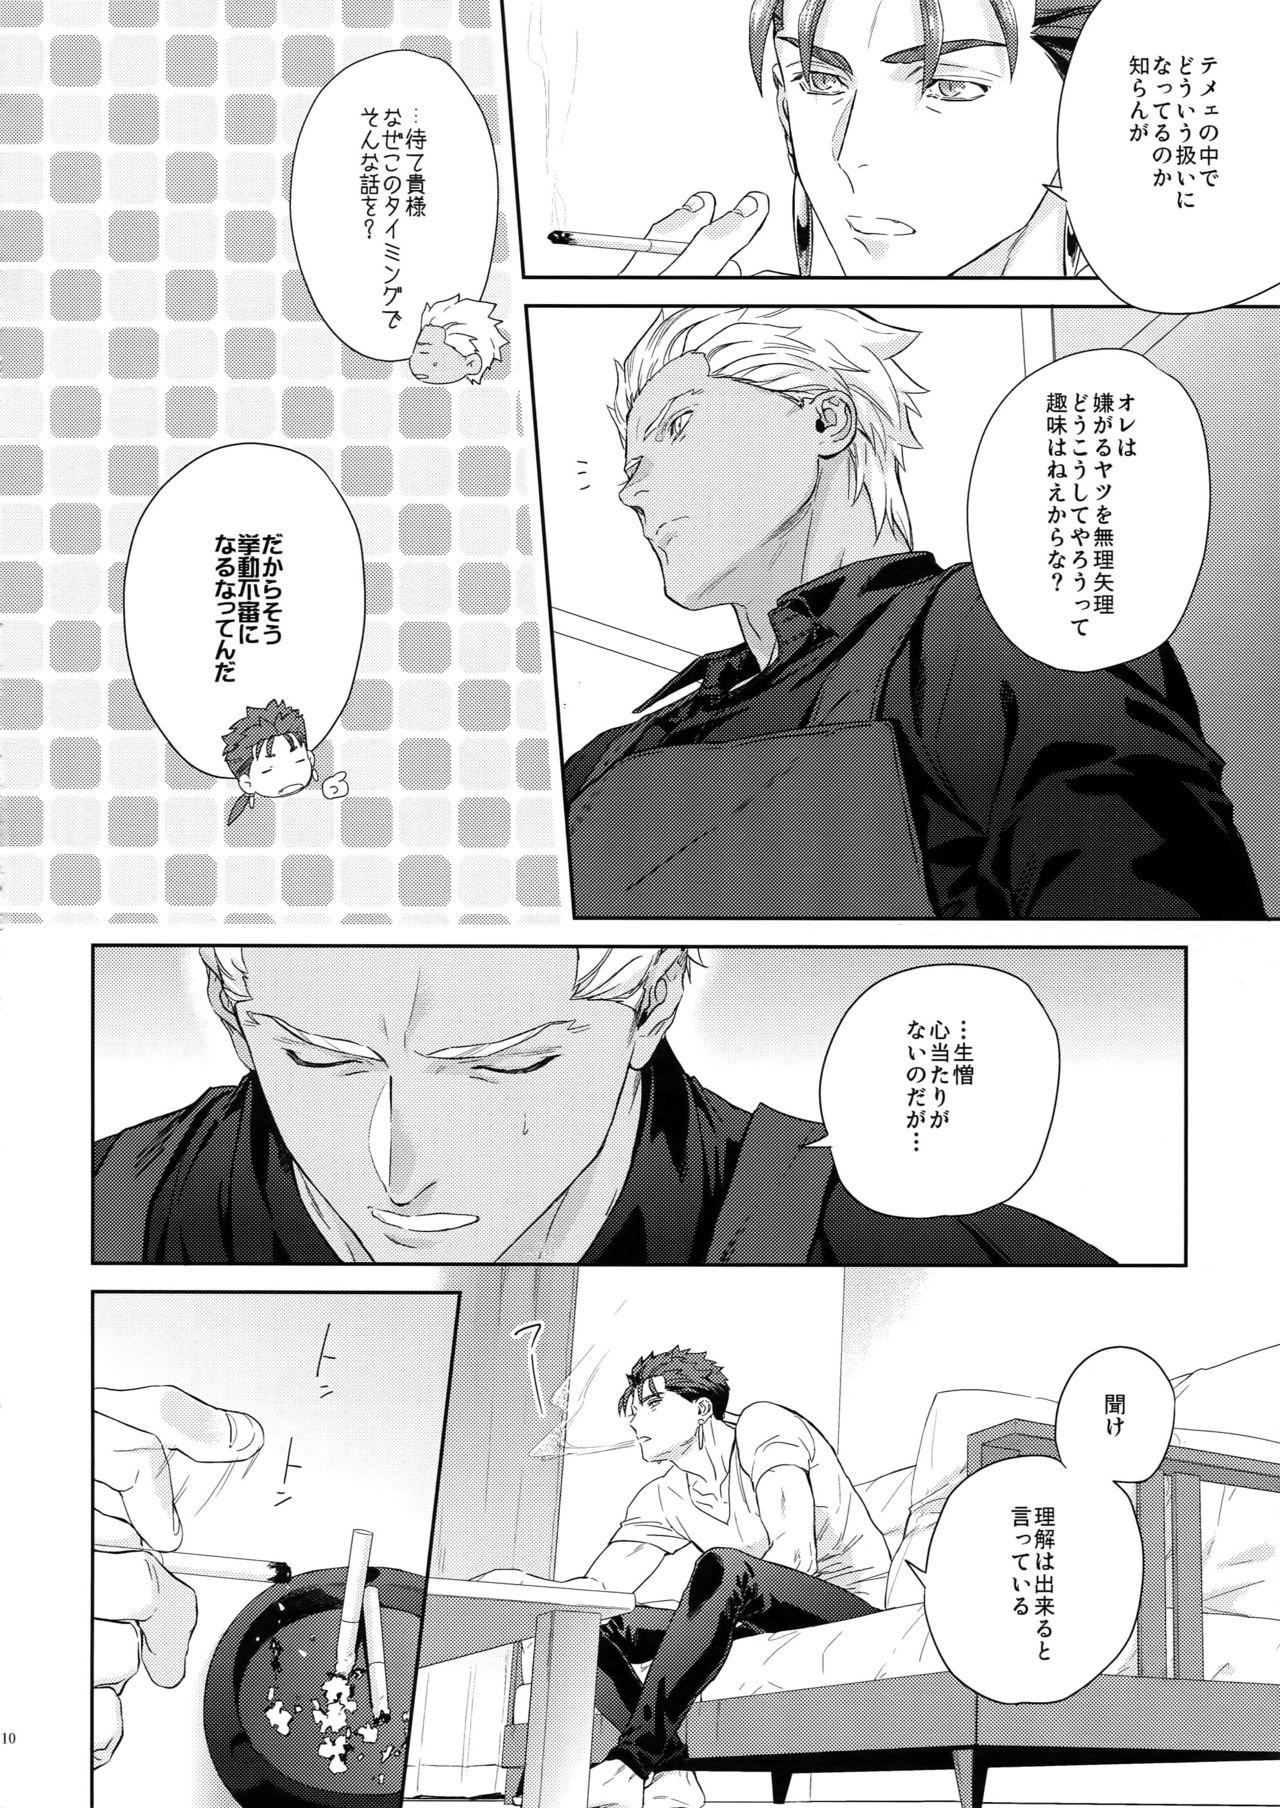 Scissoring parfum - Fate stay night Muscles - Page 9